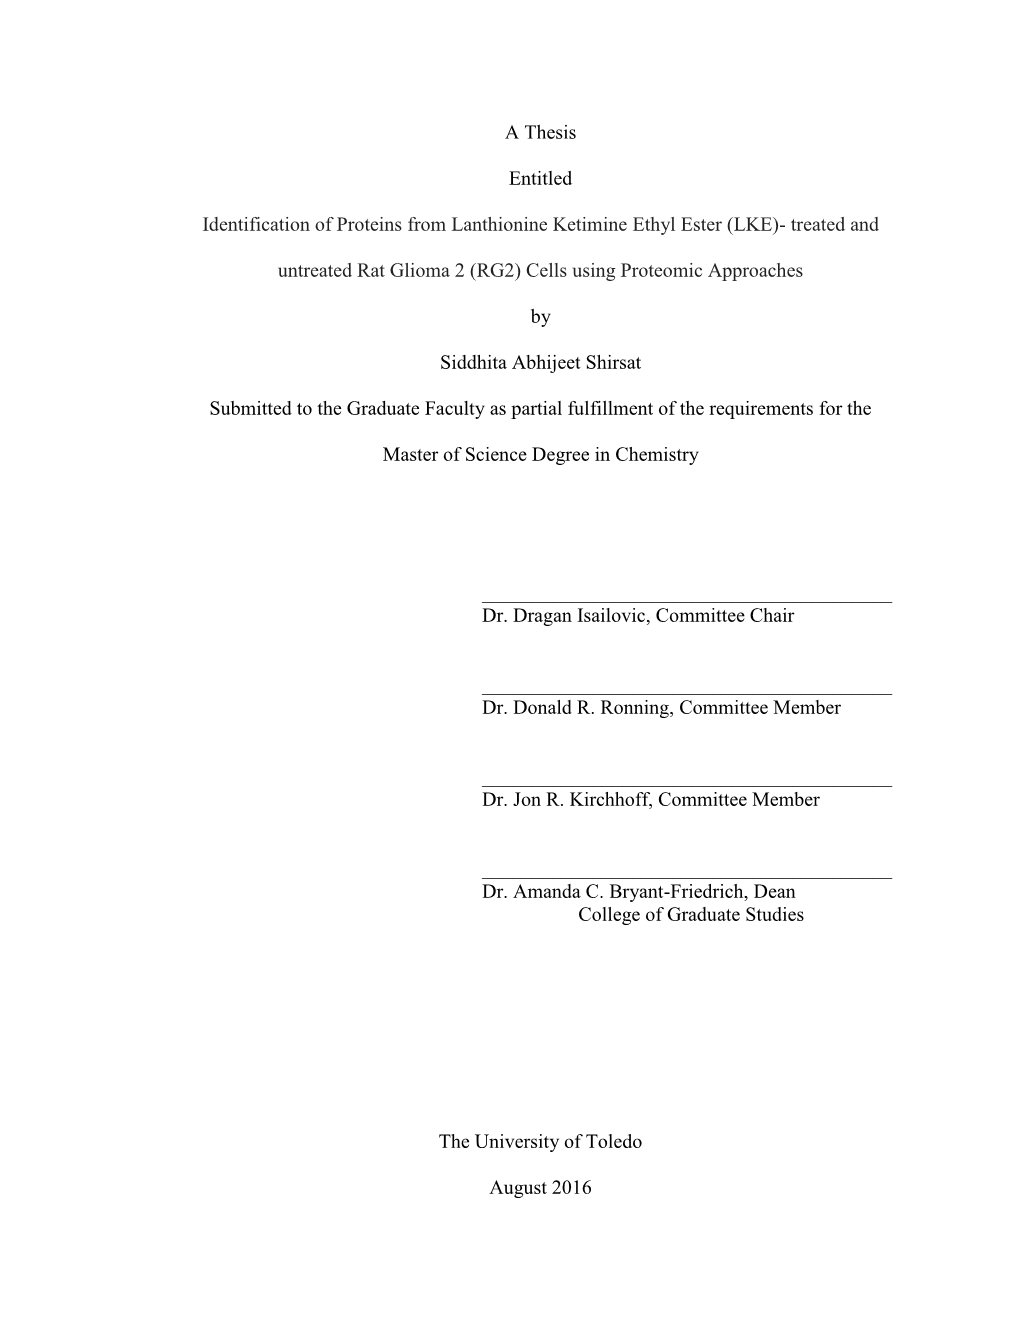 A Thesis Entitled Identification of Proteins